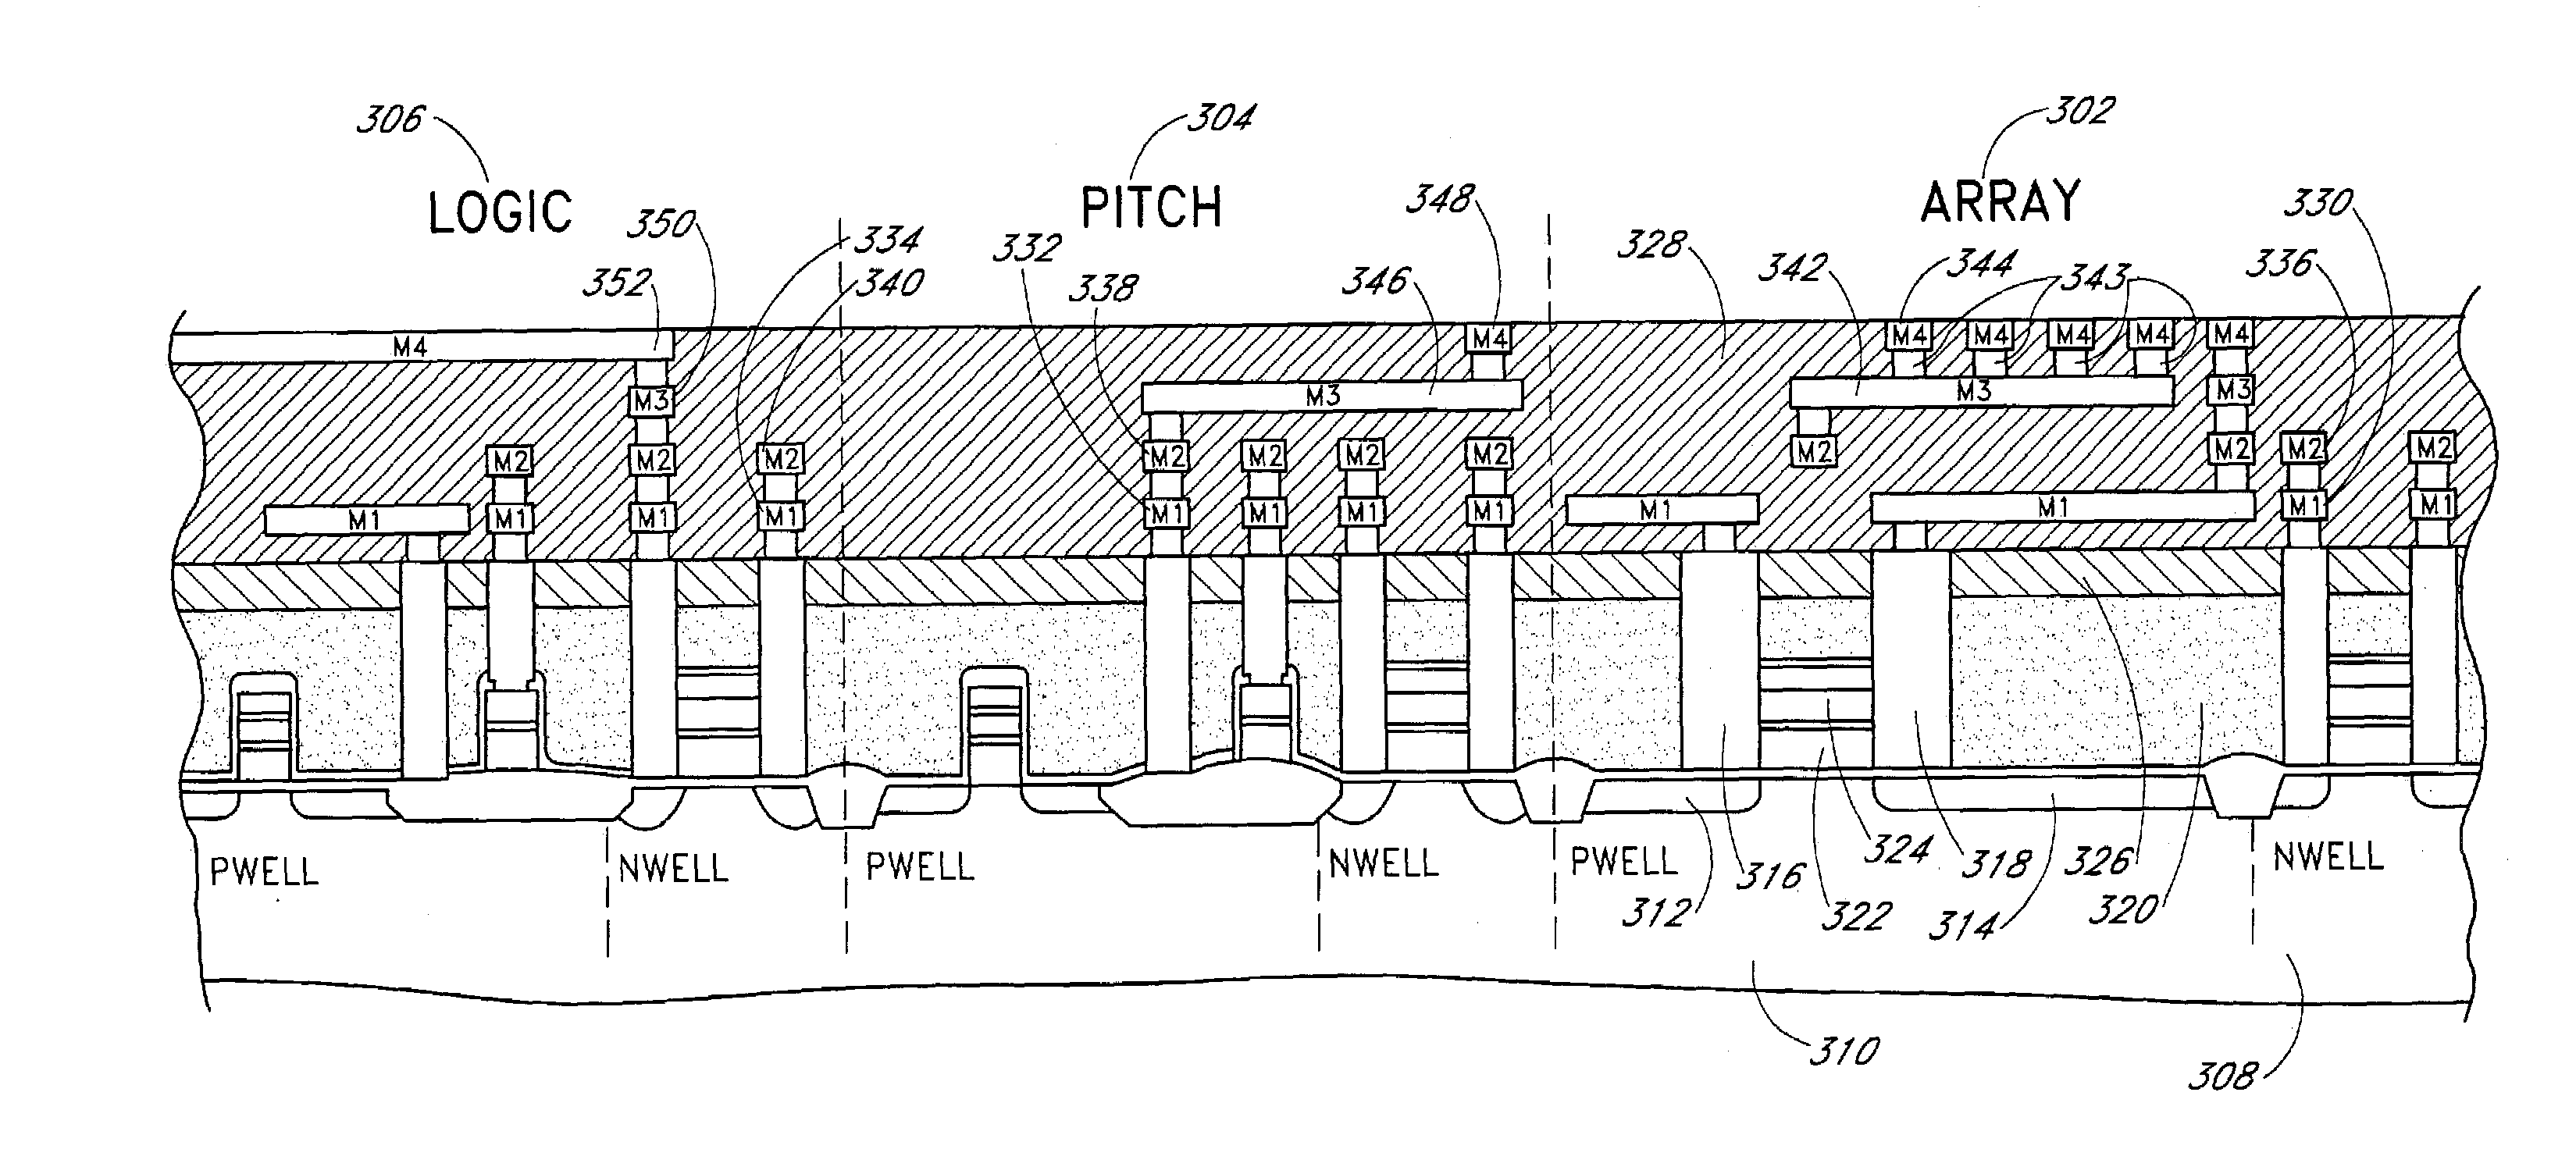 Integrated circuits with contemporaneously formed array electrodes and logic interconnects